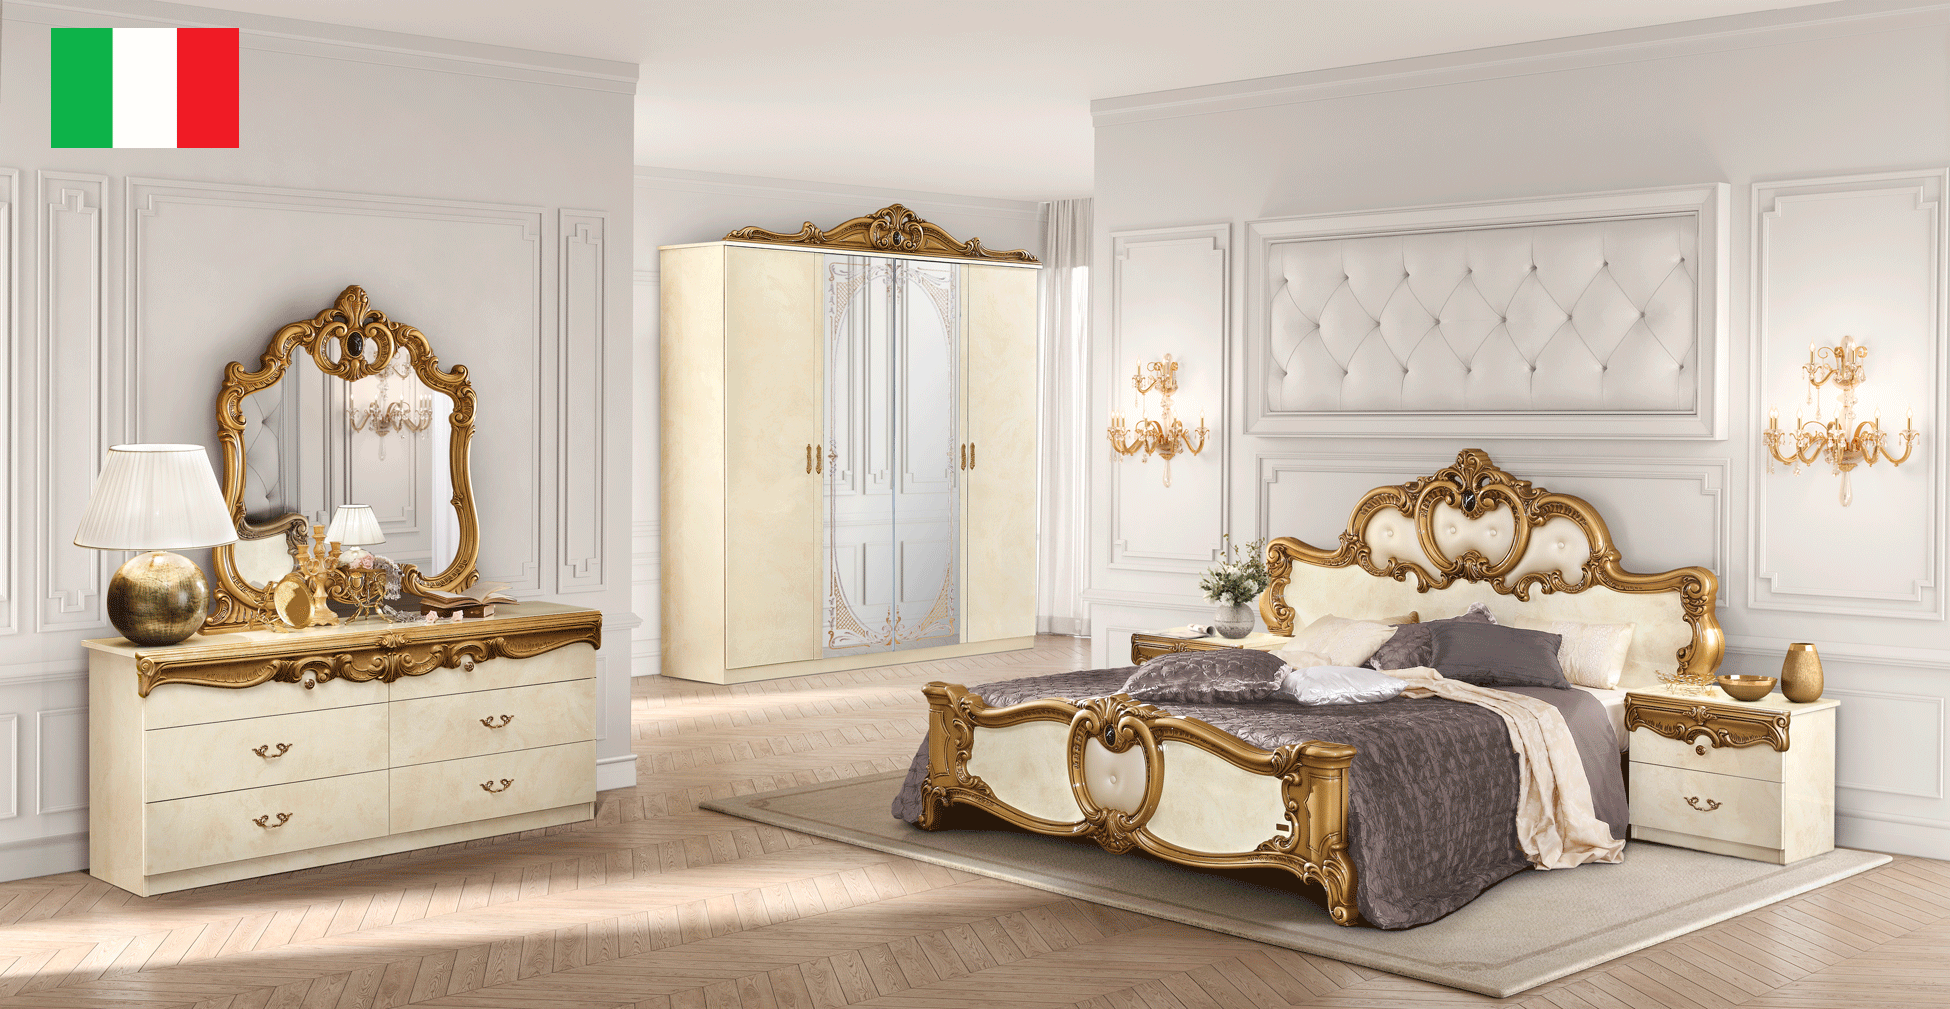 Wallunits Hallway Console tables and Mirrors Barocco Ivory w/Gold Bedroom